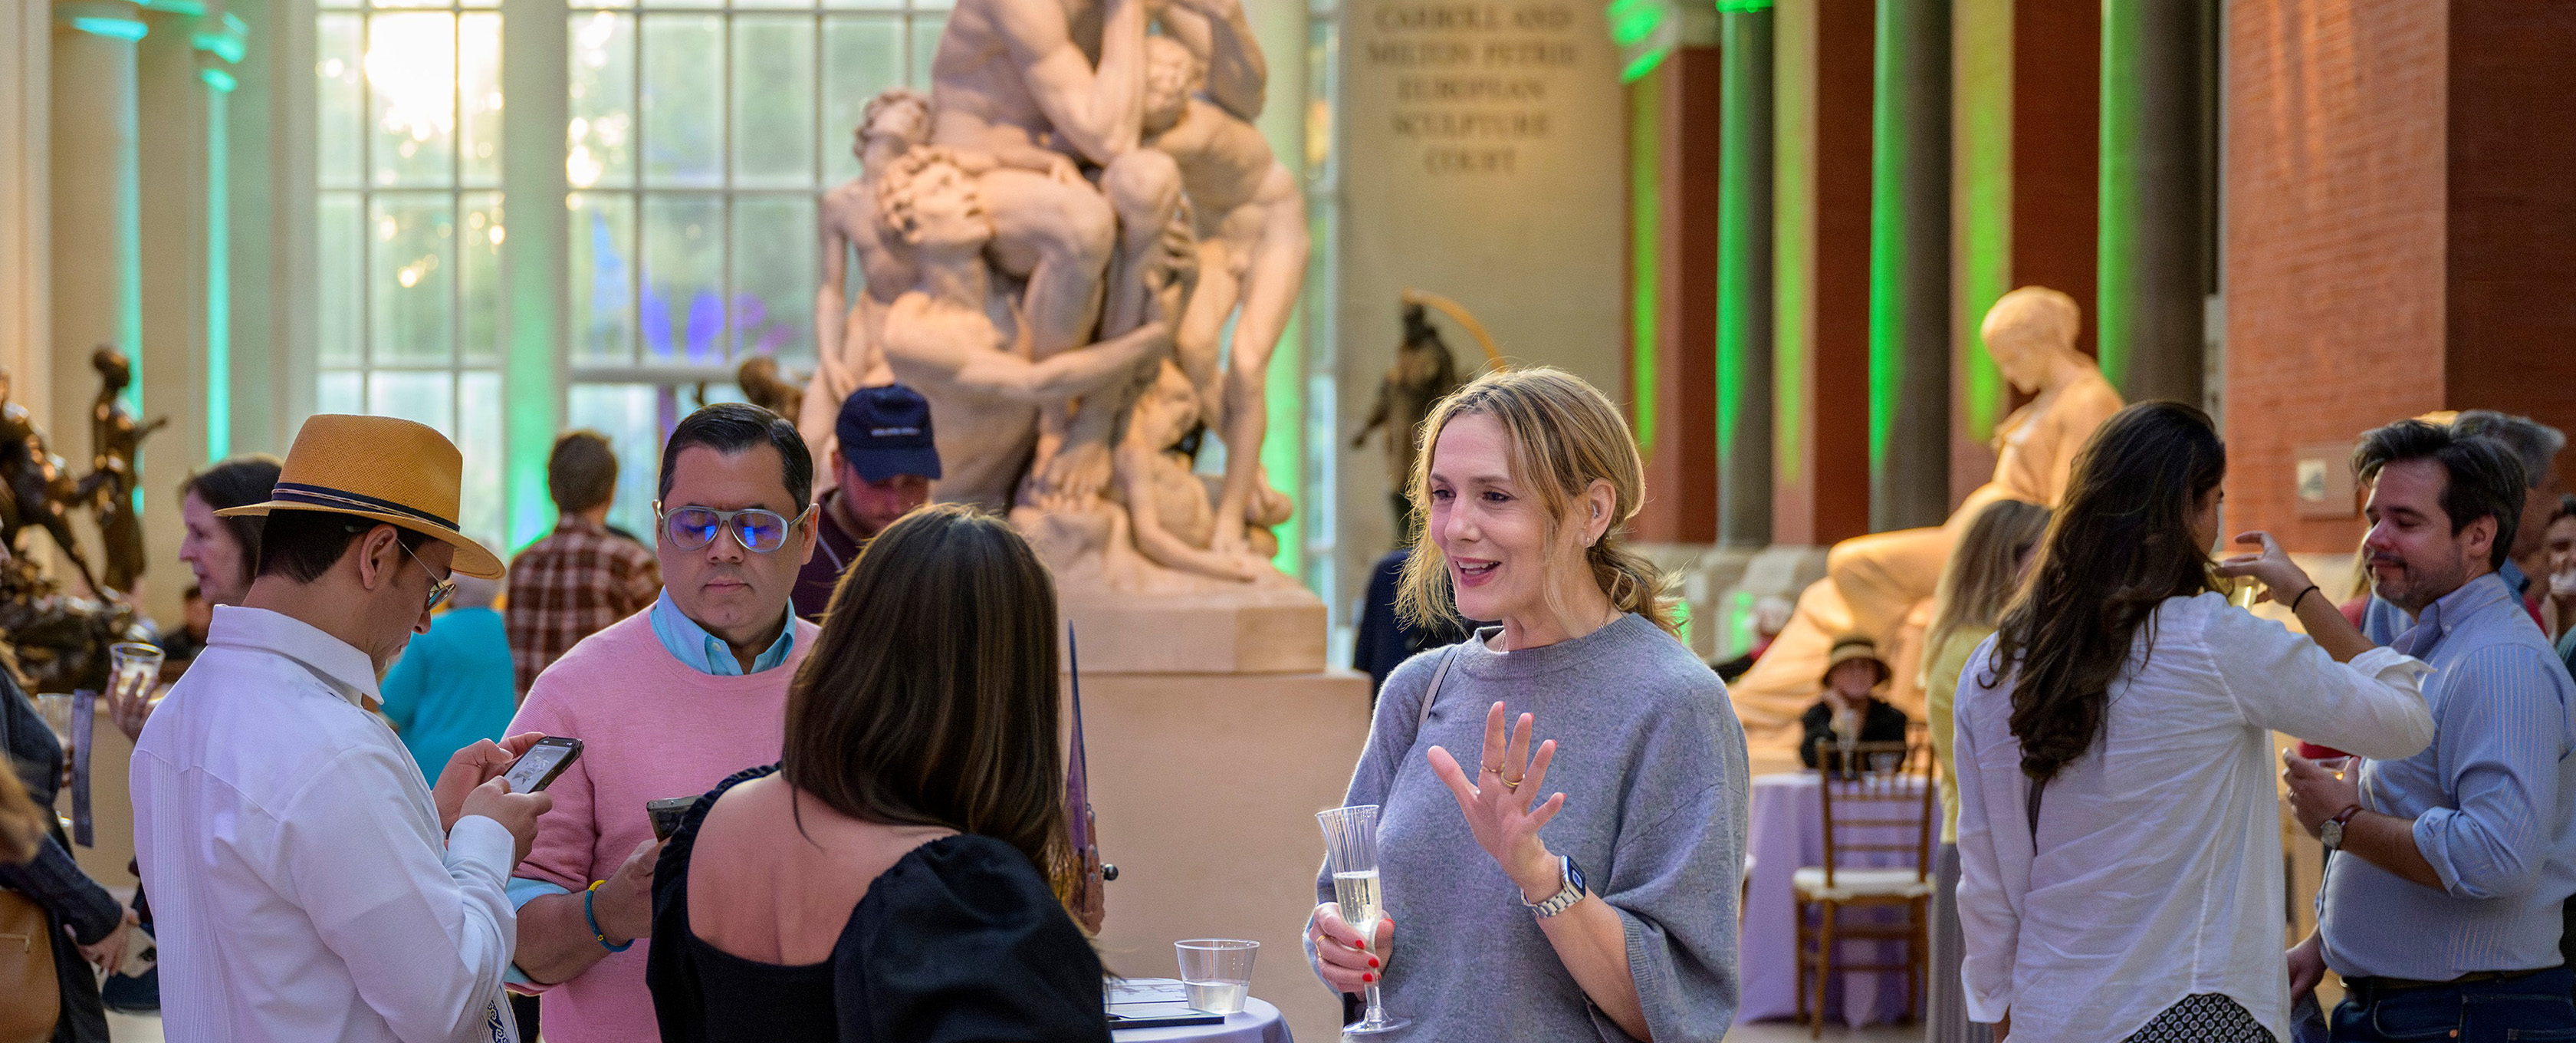 Small groups of Members conversing and enjoying drinks at The Met After Hours in The Carroll and Milton Petrie European Sculpture Court